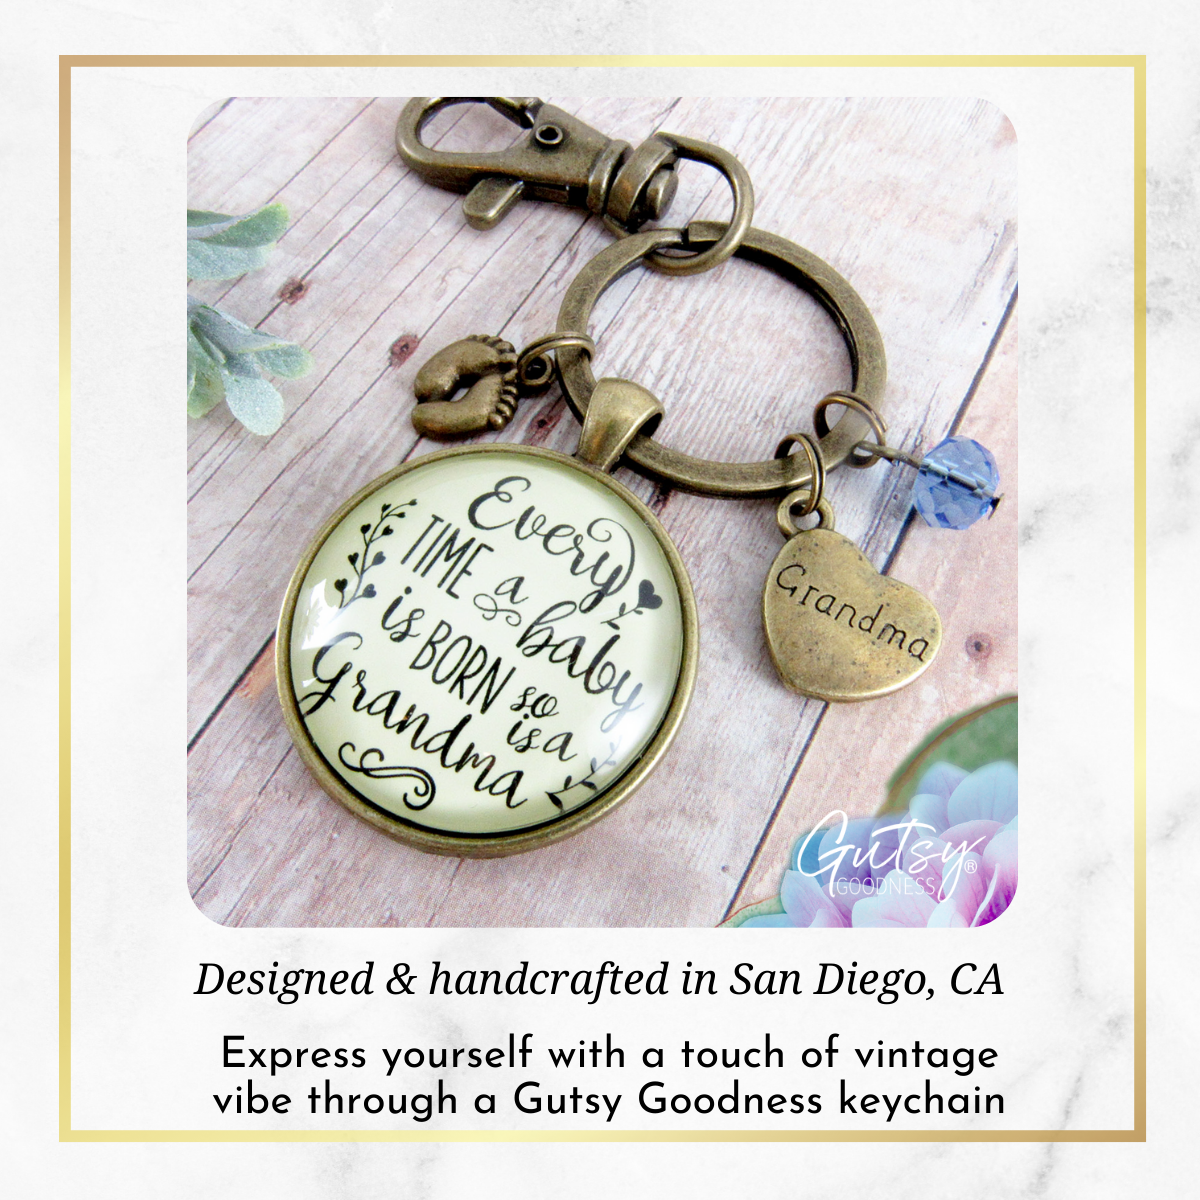 Baby Gender Reveal Keychain Every Time Born So Is Grandma Pregnancy Boy Announcement Gift Blue - Gutsy Goodness;Baby Gender Reveal Keychain Every Time Born So Is Grandma Pregnancy Boy Announcement Gift Blue - Gutsy Goodness Handmade Jewelry Gifts;Baby Gender Reveal Keychain Every Time Born So Is Grandma Pregnancy Boy Announcement Gift Blue